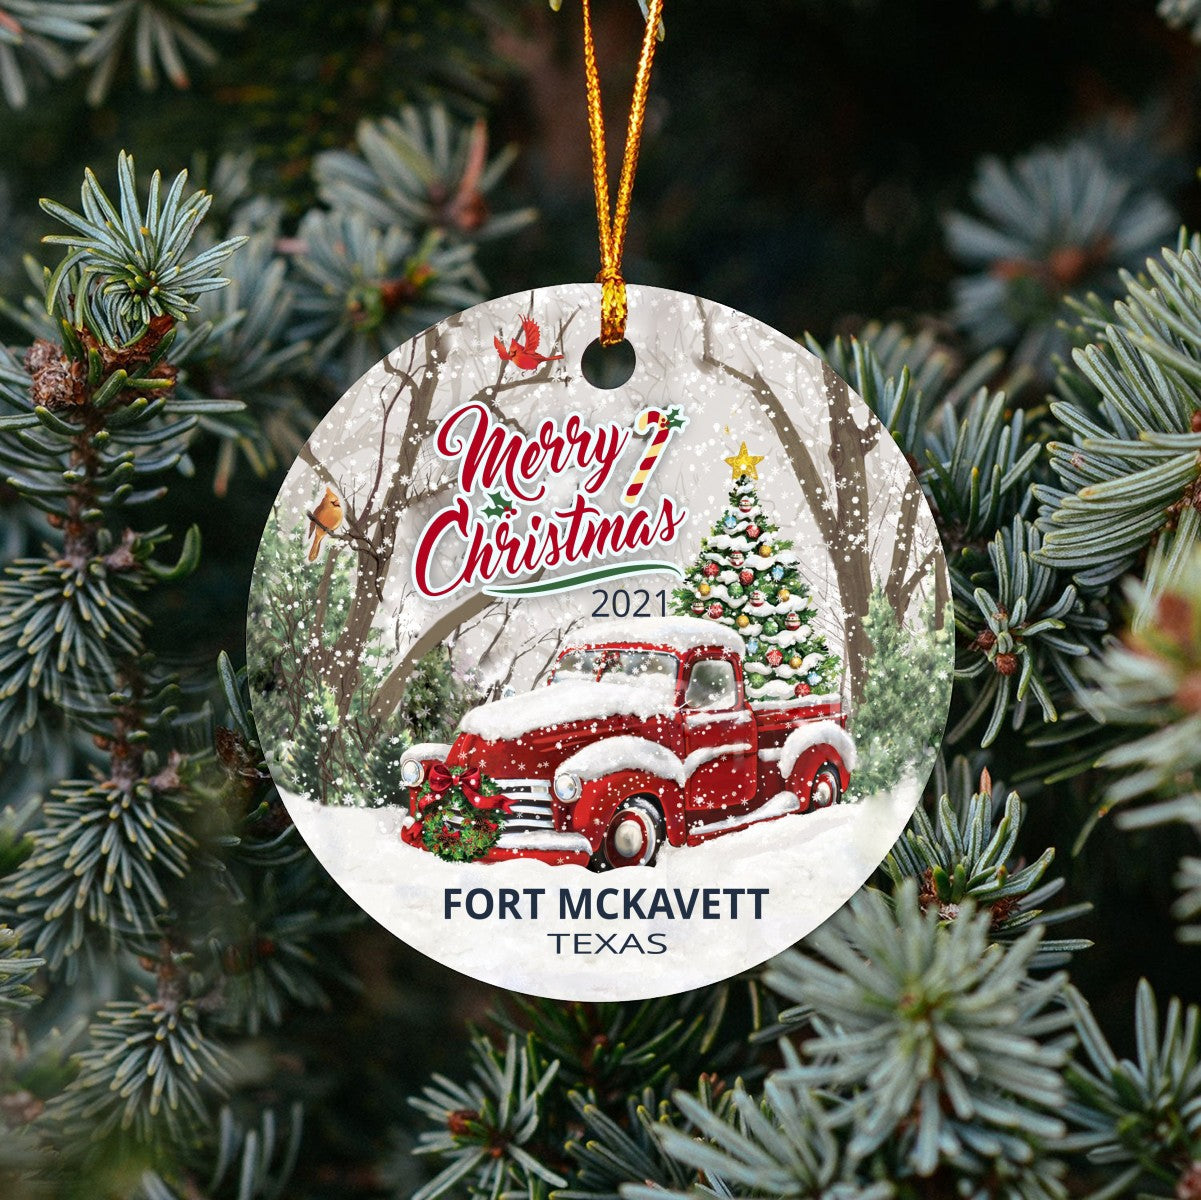 Christmas Tree Ornaments Fort McKavett - Ornament With Name City, State Fort McKavett Texas TX Ornament - Red Truck Xmas Ornaments 3'' Plastic Gift For Family, Friend And Housewarming